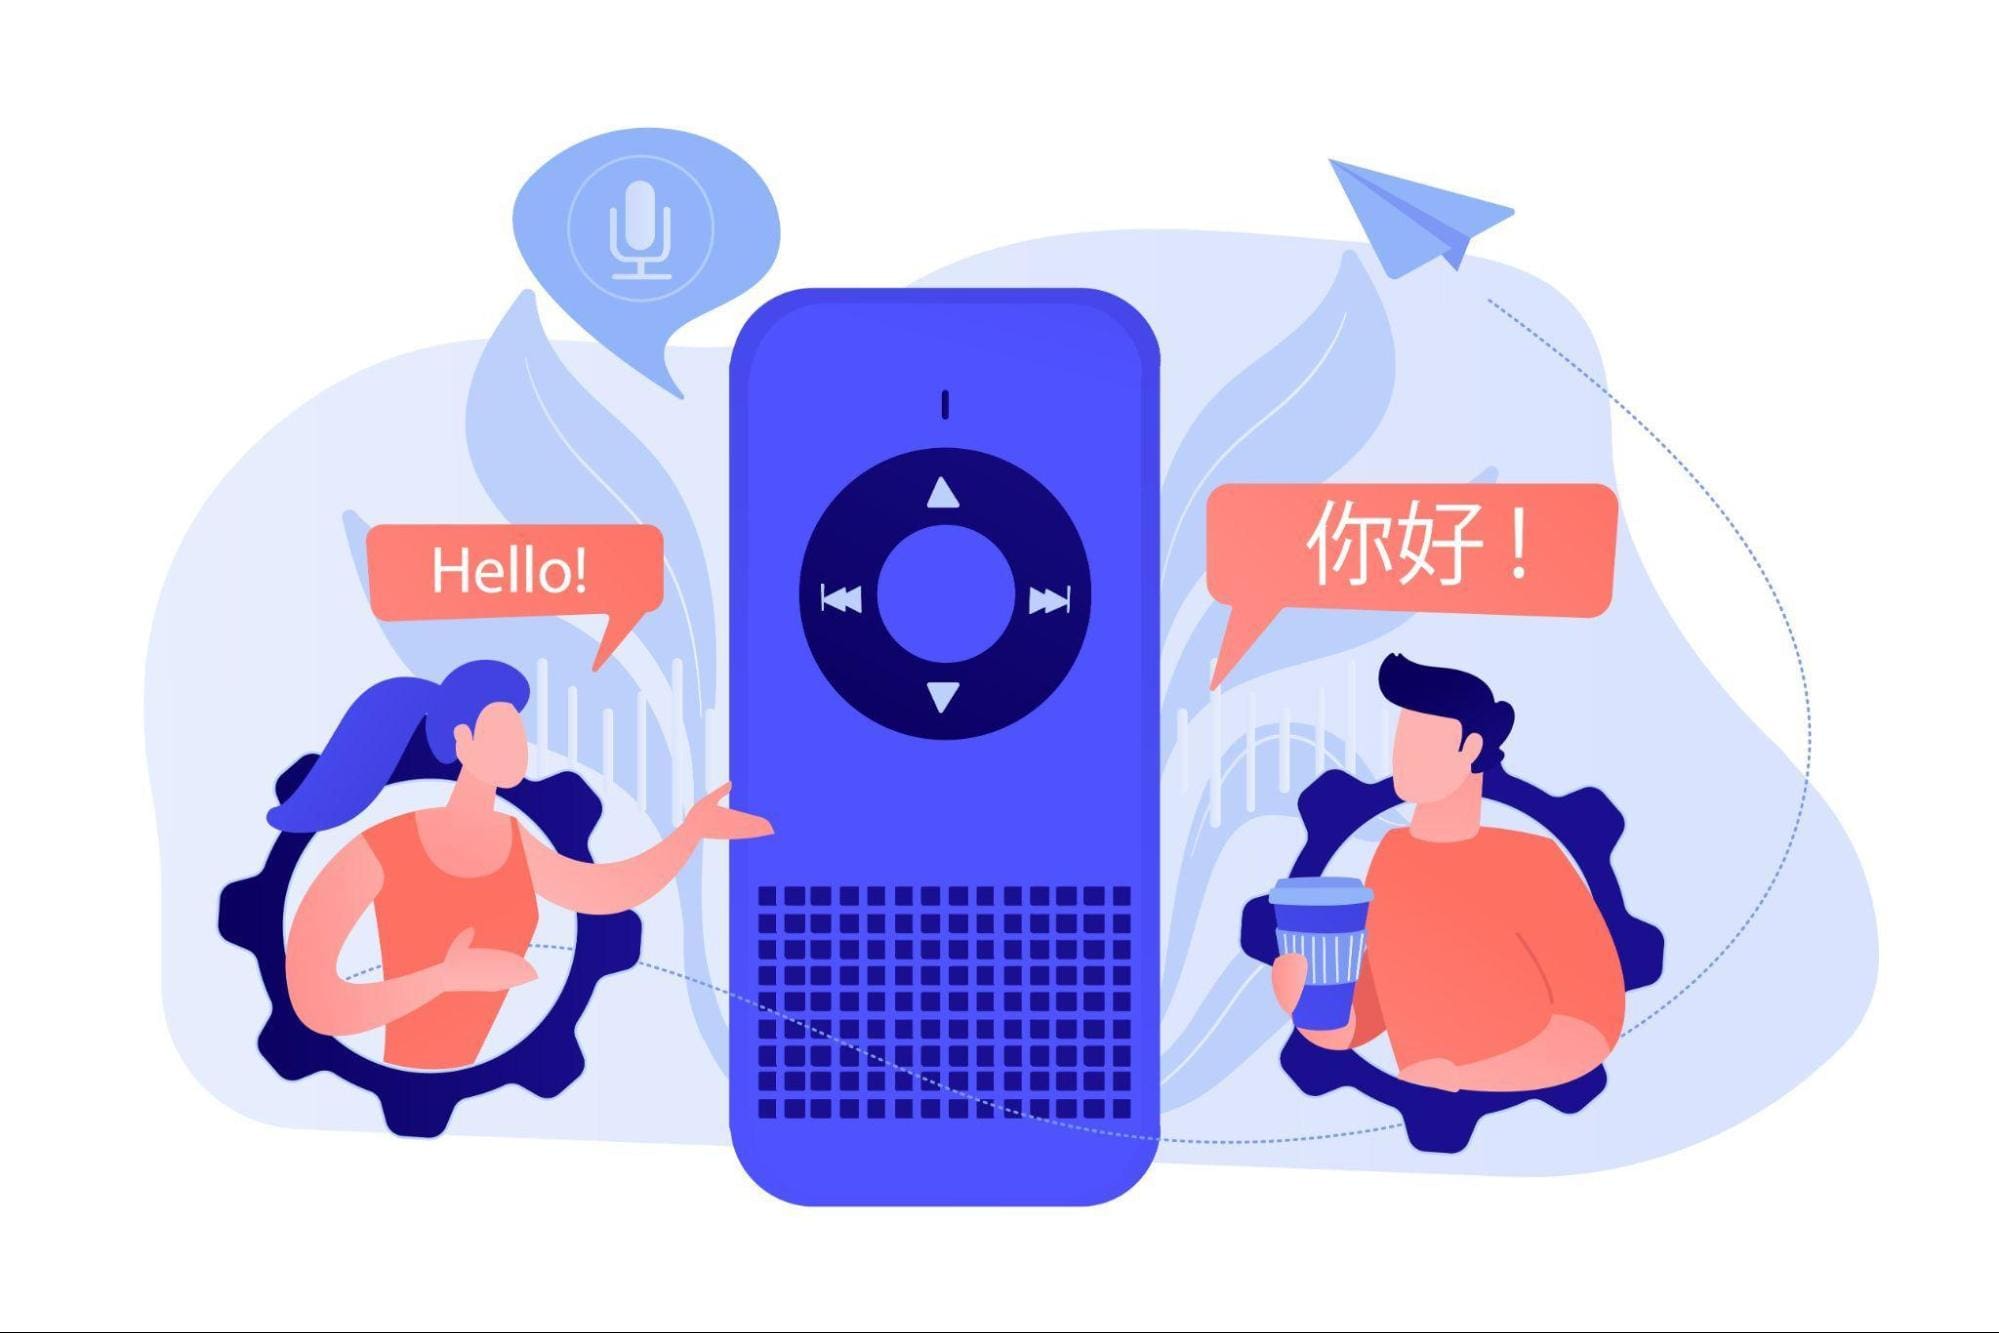 How Does Real-time Translation Work With AI?